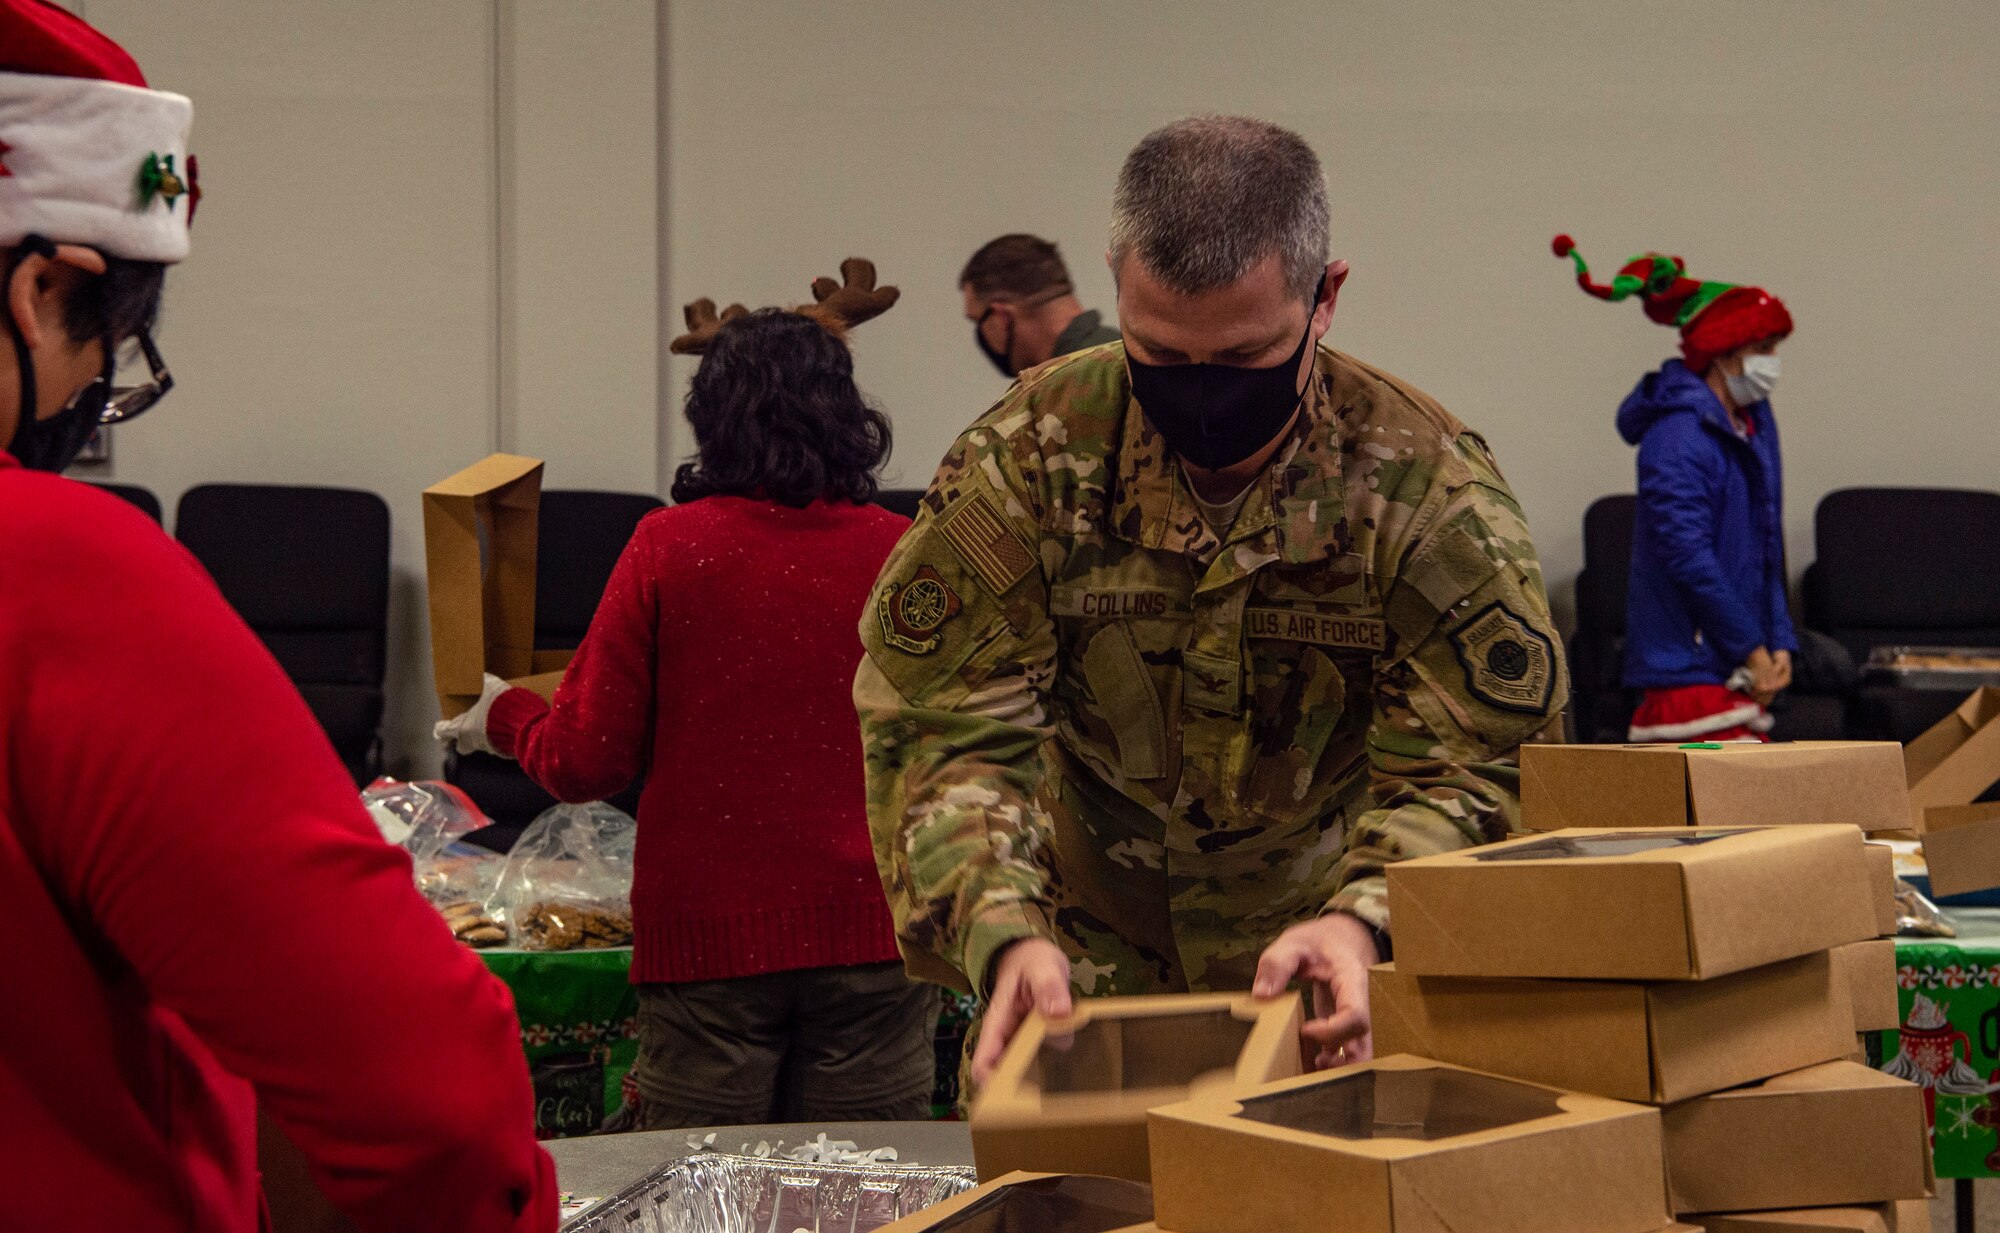 Col. Brian Collins, 62nd Airlift Wing vice commander, assembles boxes together during Operation Cookie Drop Dec. 9, 2020, at Joint Base Lewis-McChord (JBLM), Wash. Leaders, spouses and other volunteers from across JBLM and the community donated cookies and their time to provide a dozen cookies to every dorm resident Airman for the holidays. (U.S. Air Force photo by Senior Airman Tryphena Mayhugh)